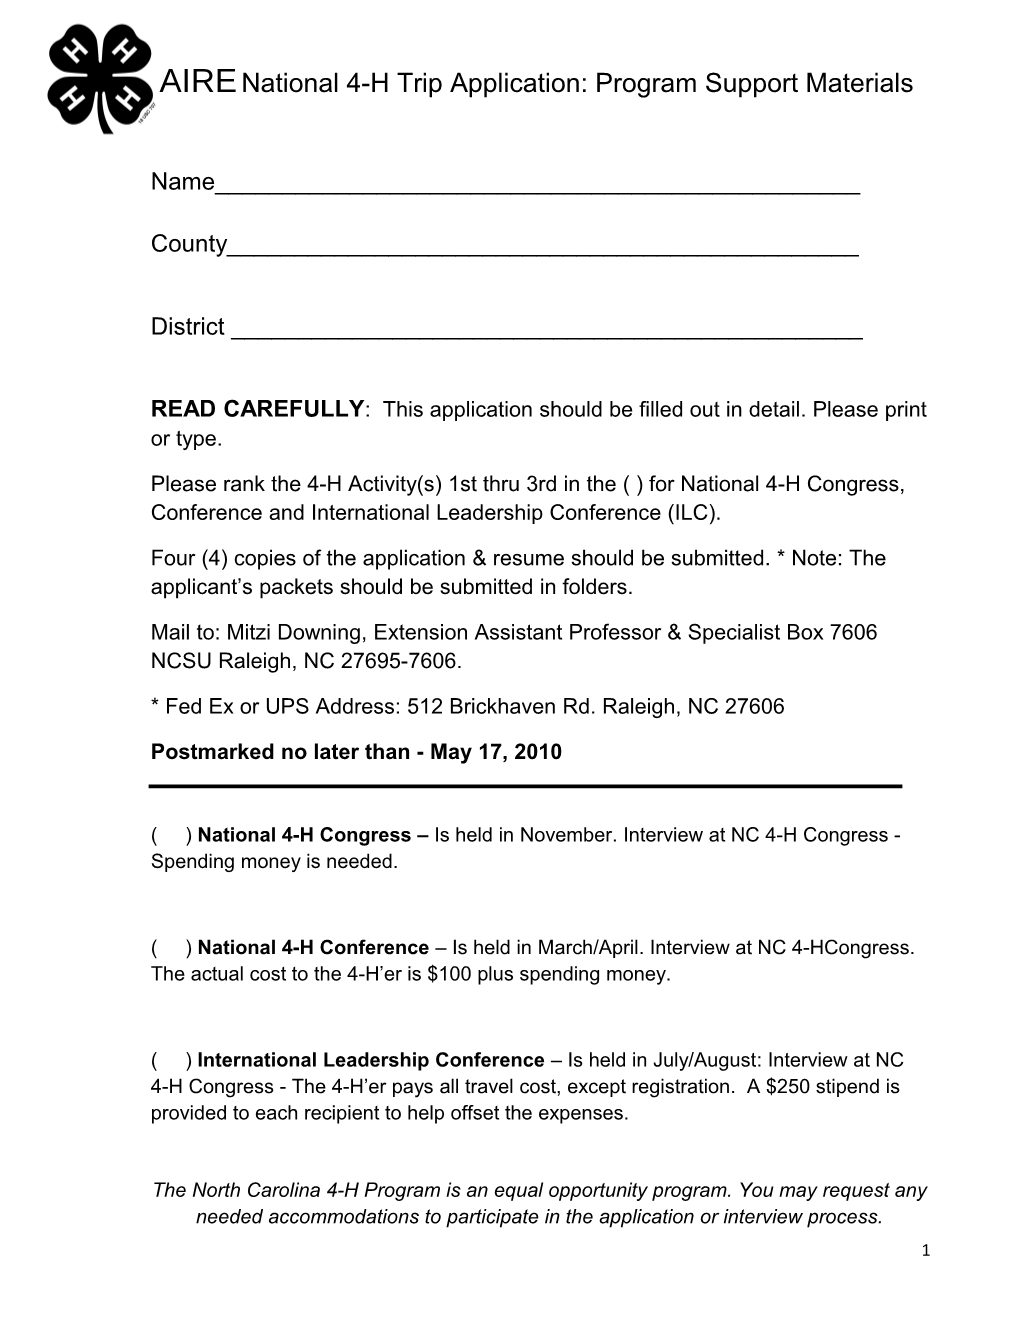 AIRE National 4-H Trip Application: Program Support Materials